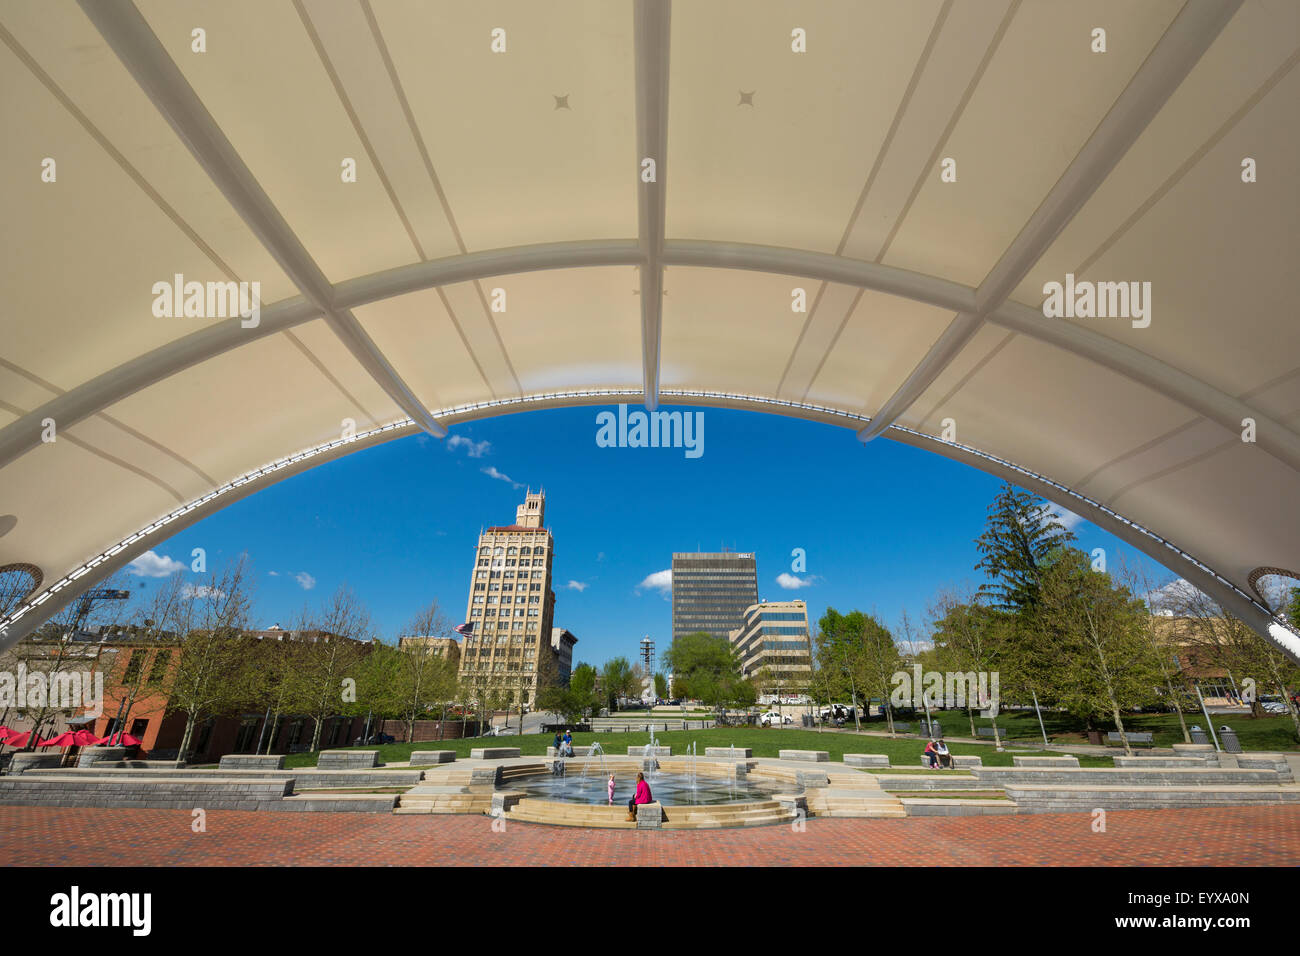 BANDSTAND PACK SQUARE PARK DOWNTOWN ASHEVILLE BUNCOMBE COUNTY North Carolina USA Foto Stock